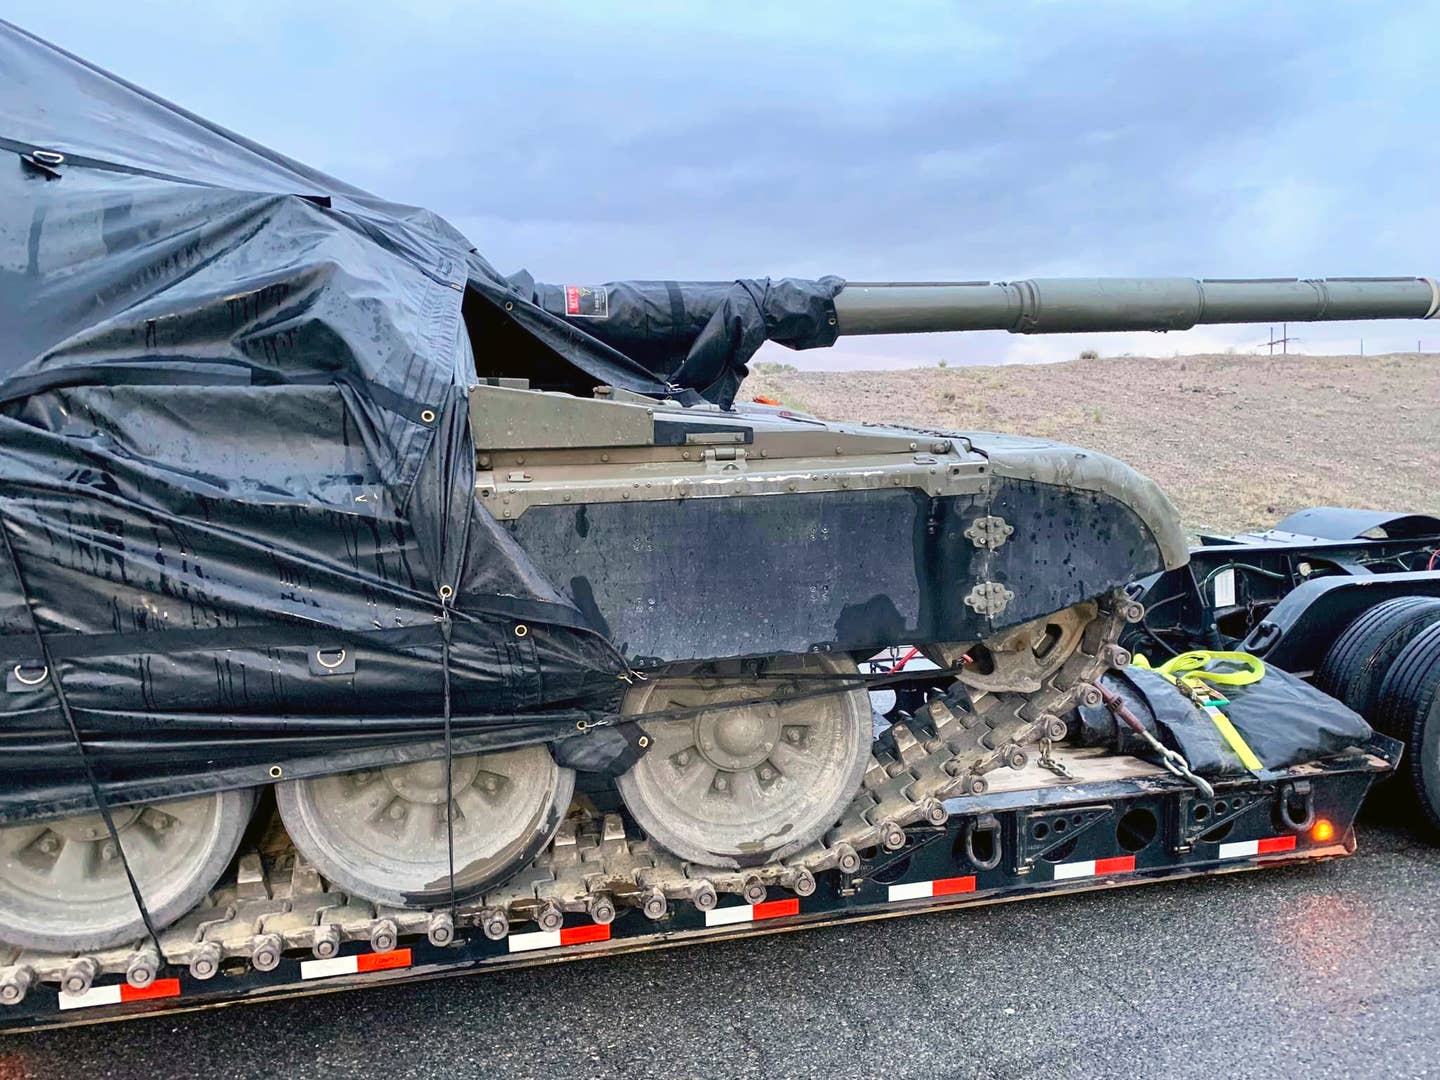 This tank was spotted at a Pilot Travel Center at West Wendover, Nevada, on May 13 by Navy veteran Dave Trojan. (Courtesy Dave Trojan)